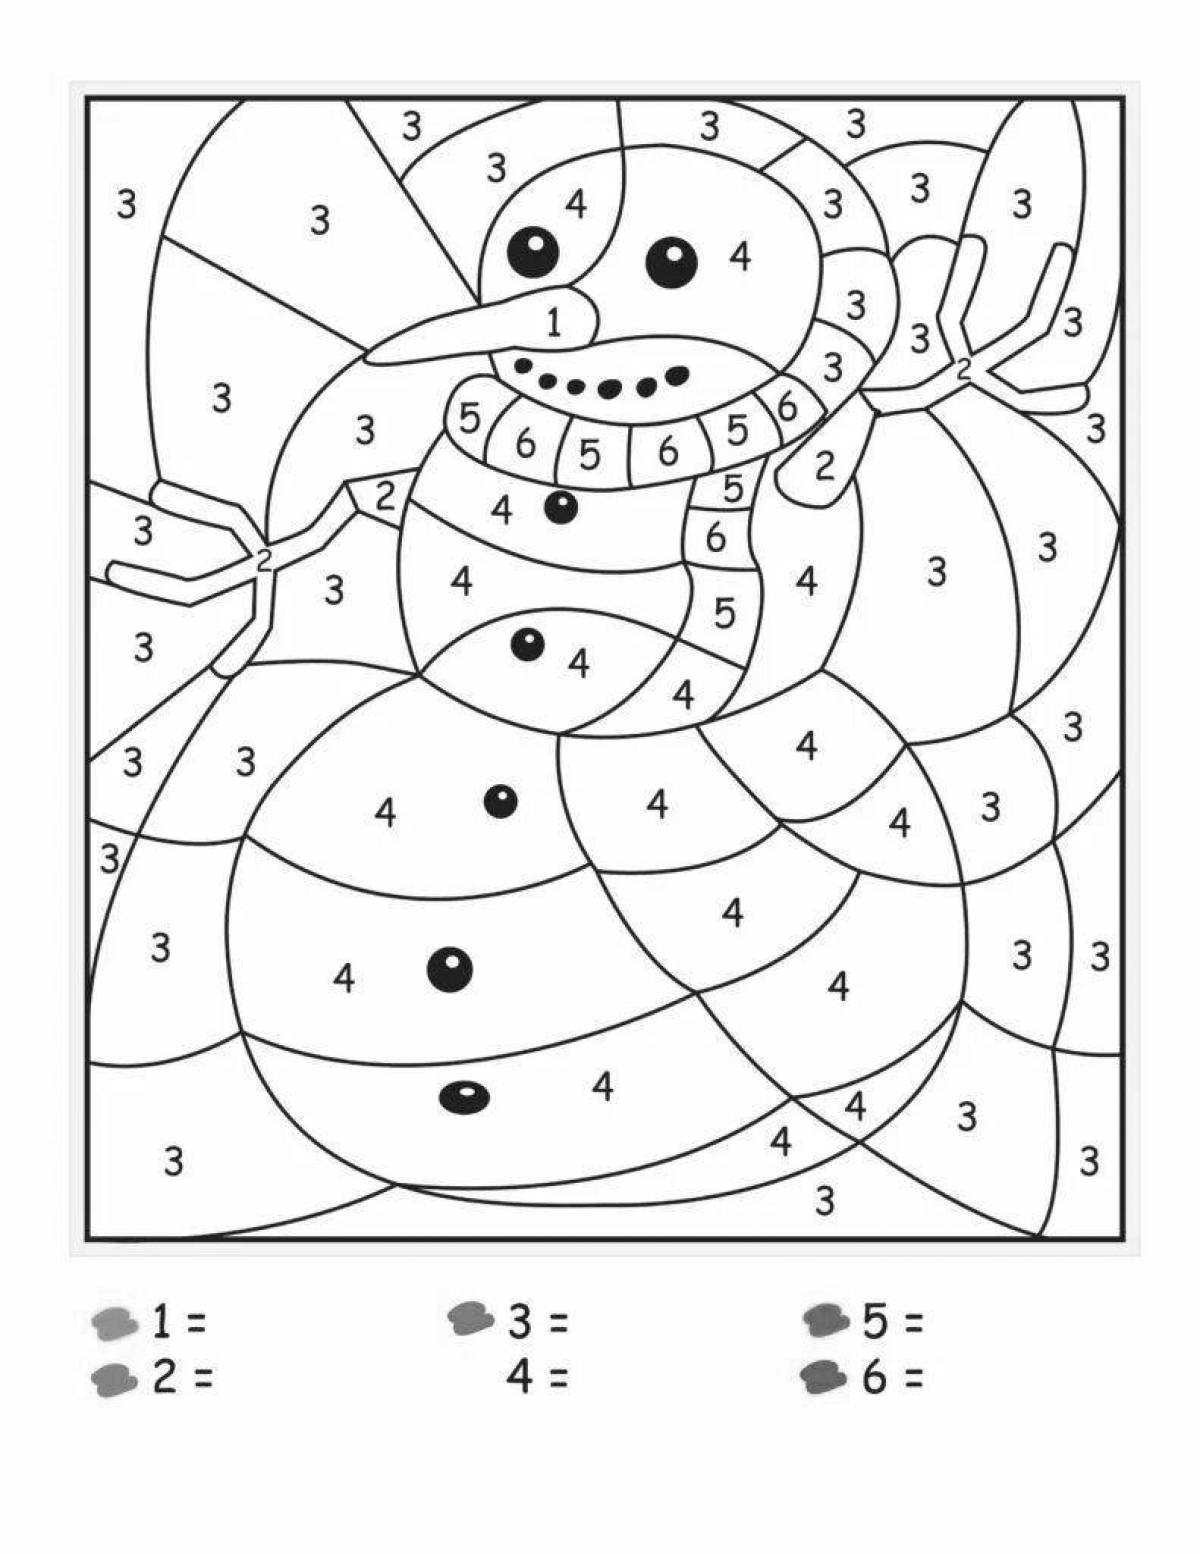 Attractive Christmas tree coloring by numbers